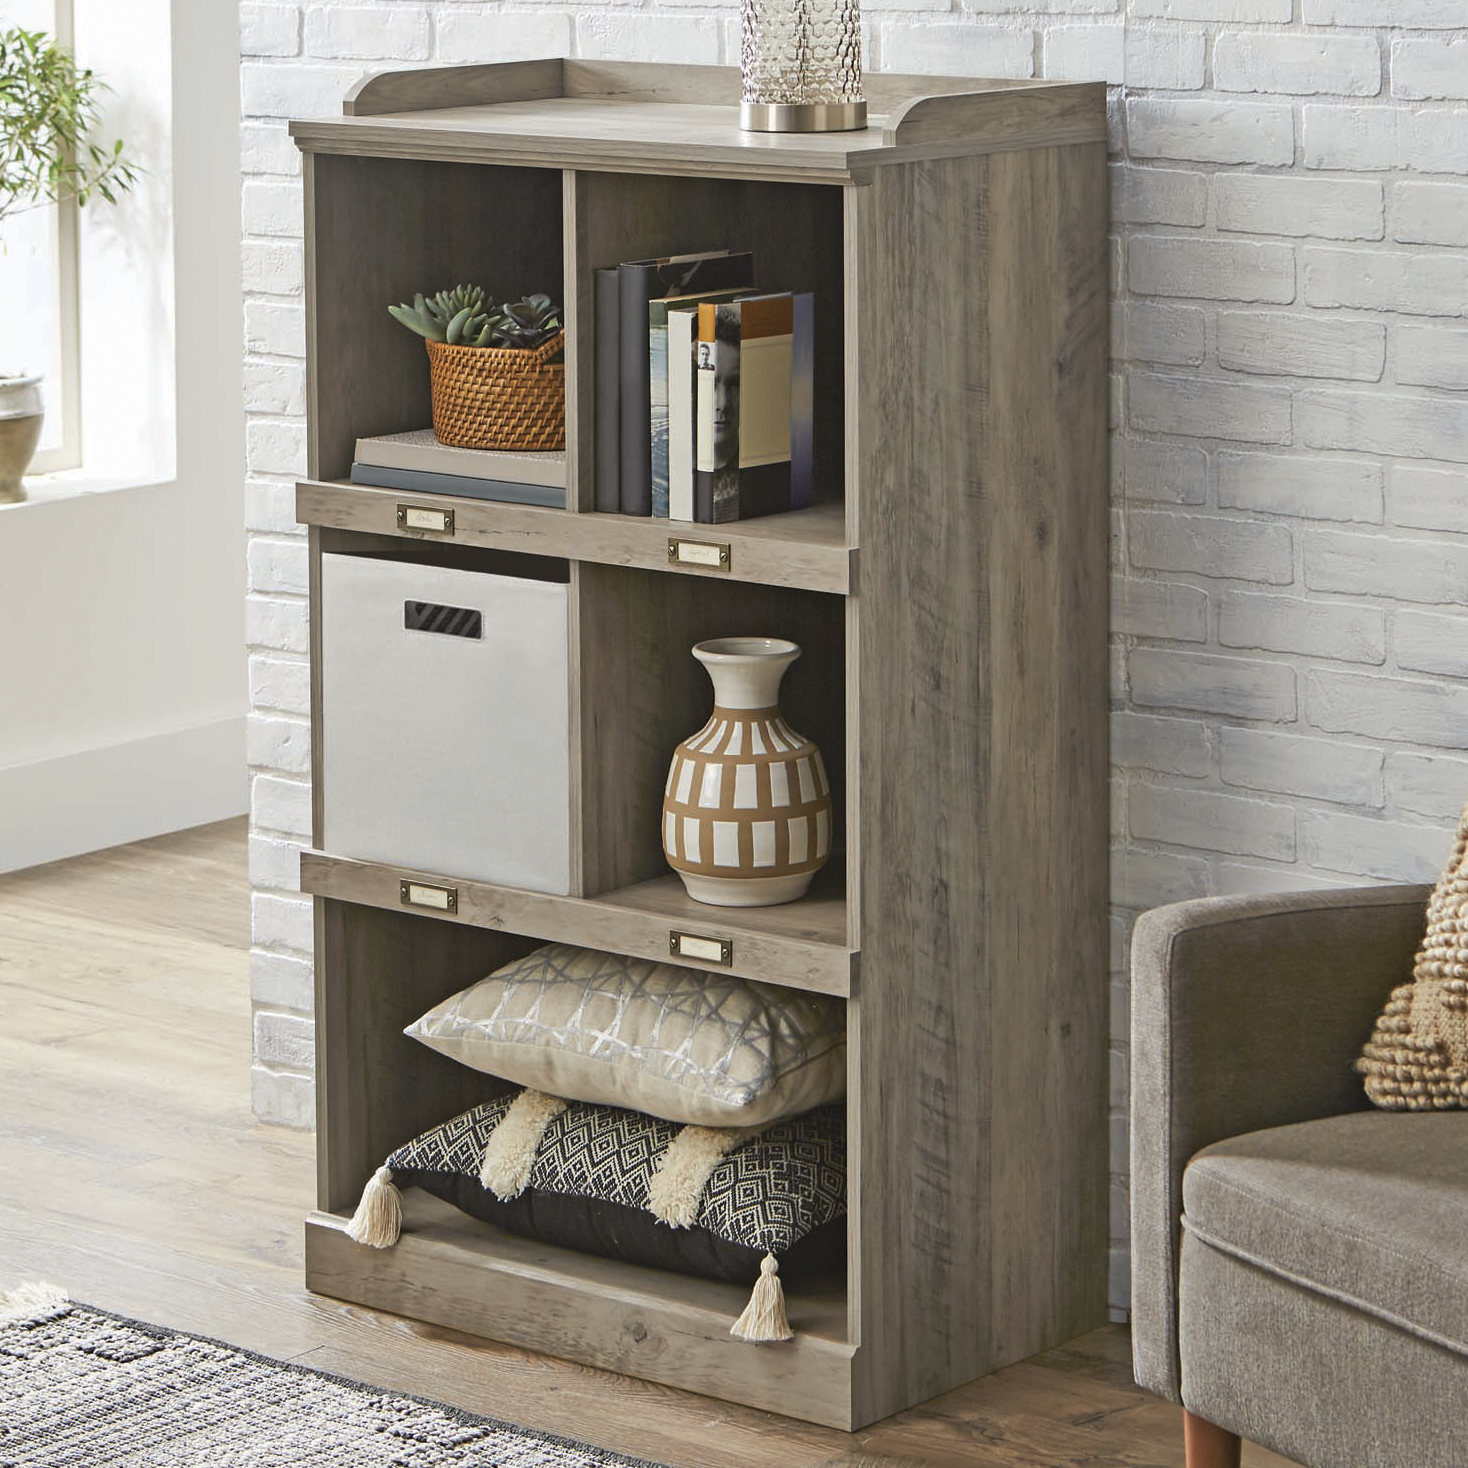 Better Homes & Gardens Modern Farmhouse 5-Cube Organizer Bookcase with Name Plates, Rustic Gray Finish - image 5 of 7